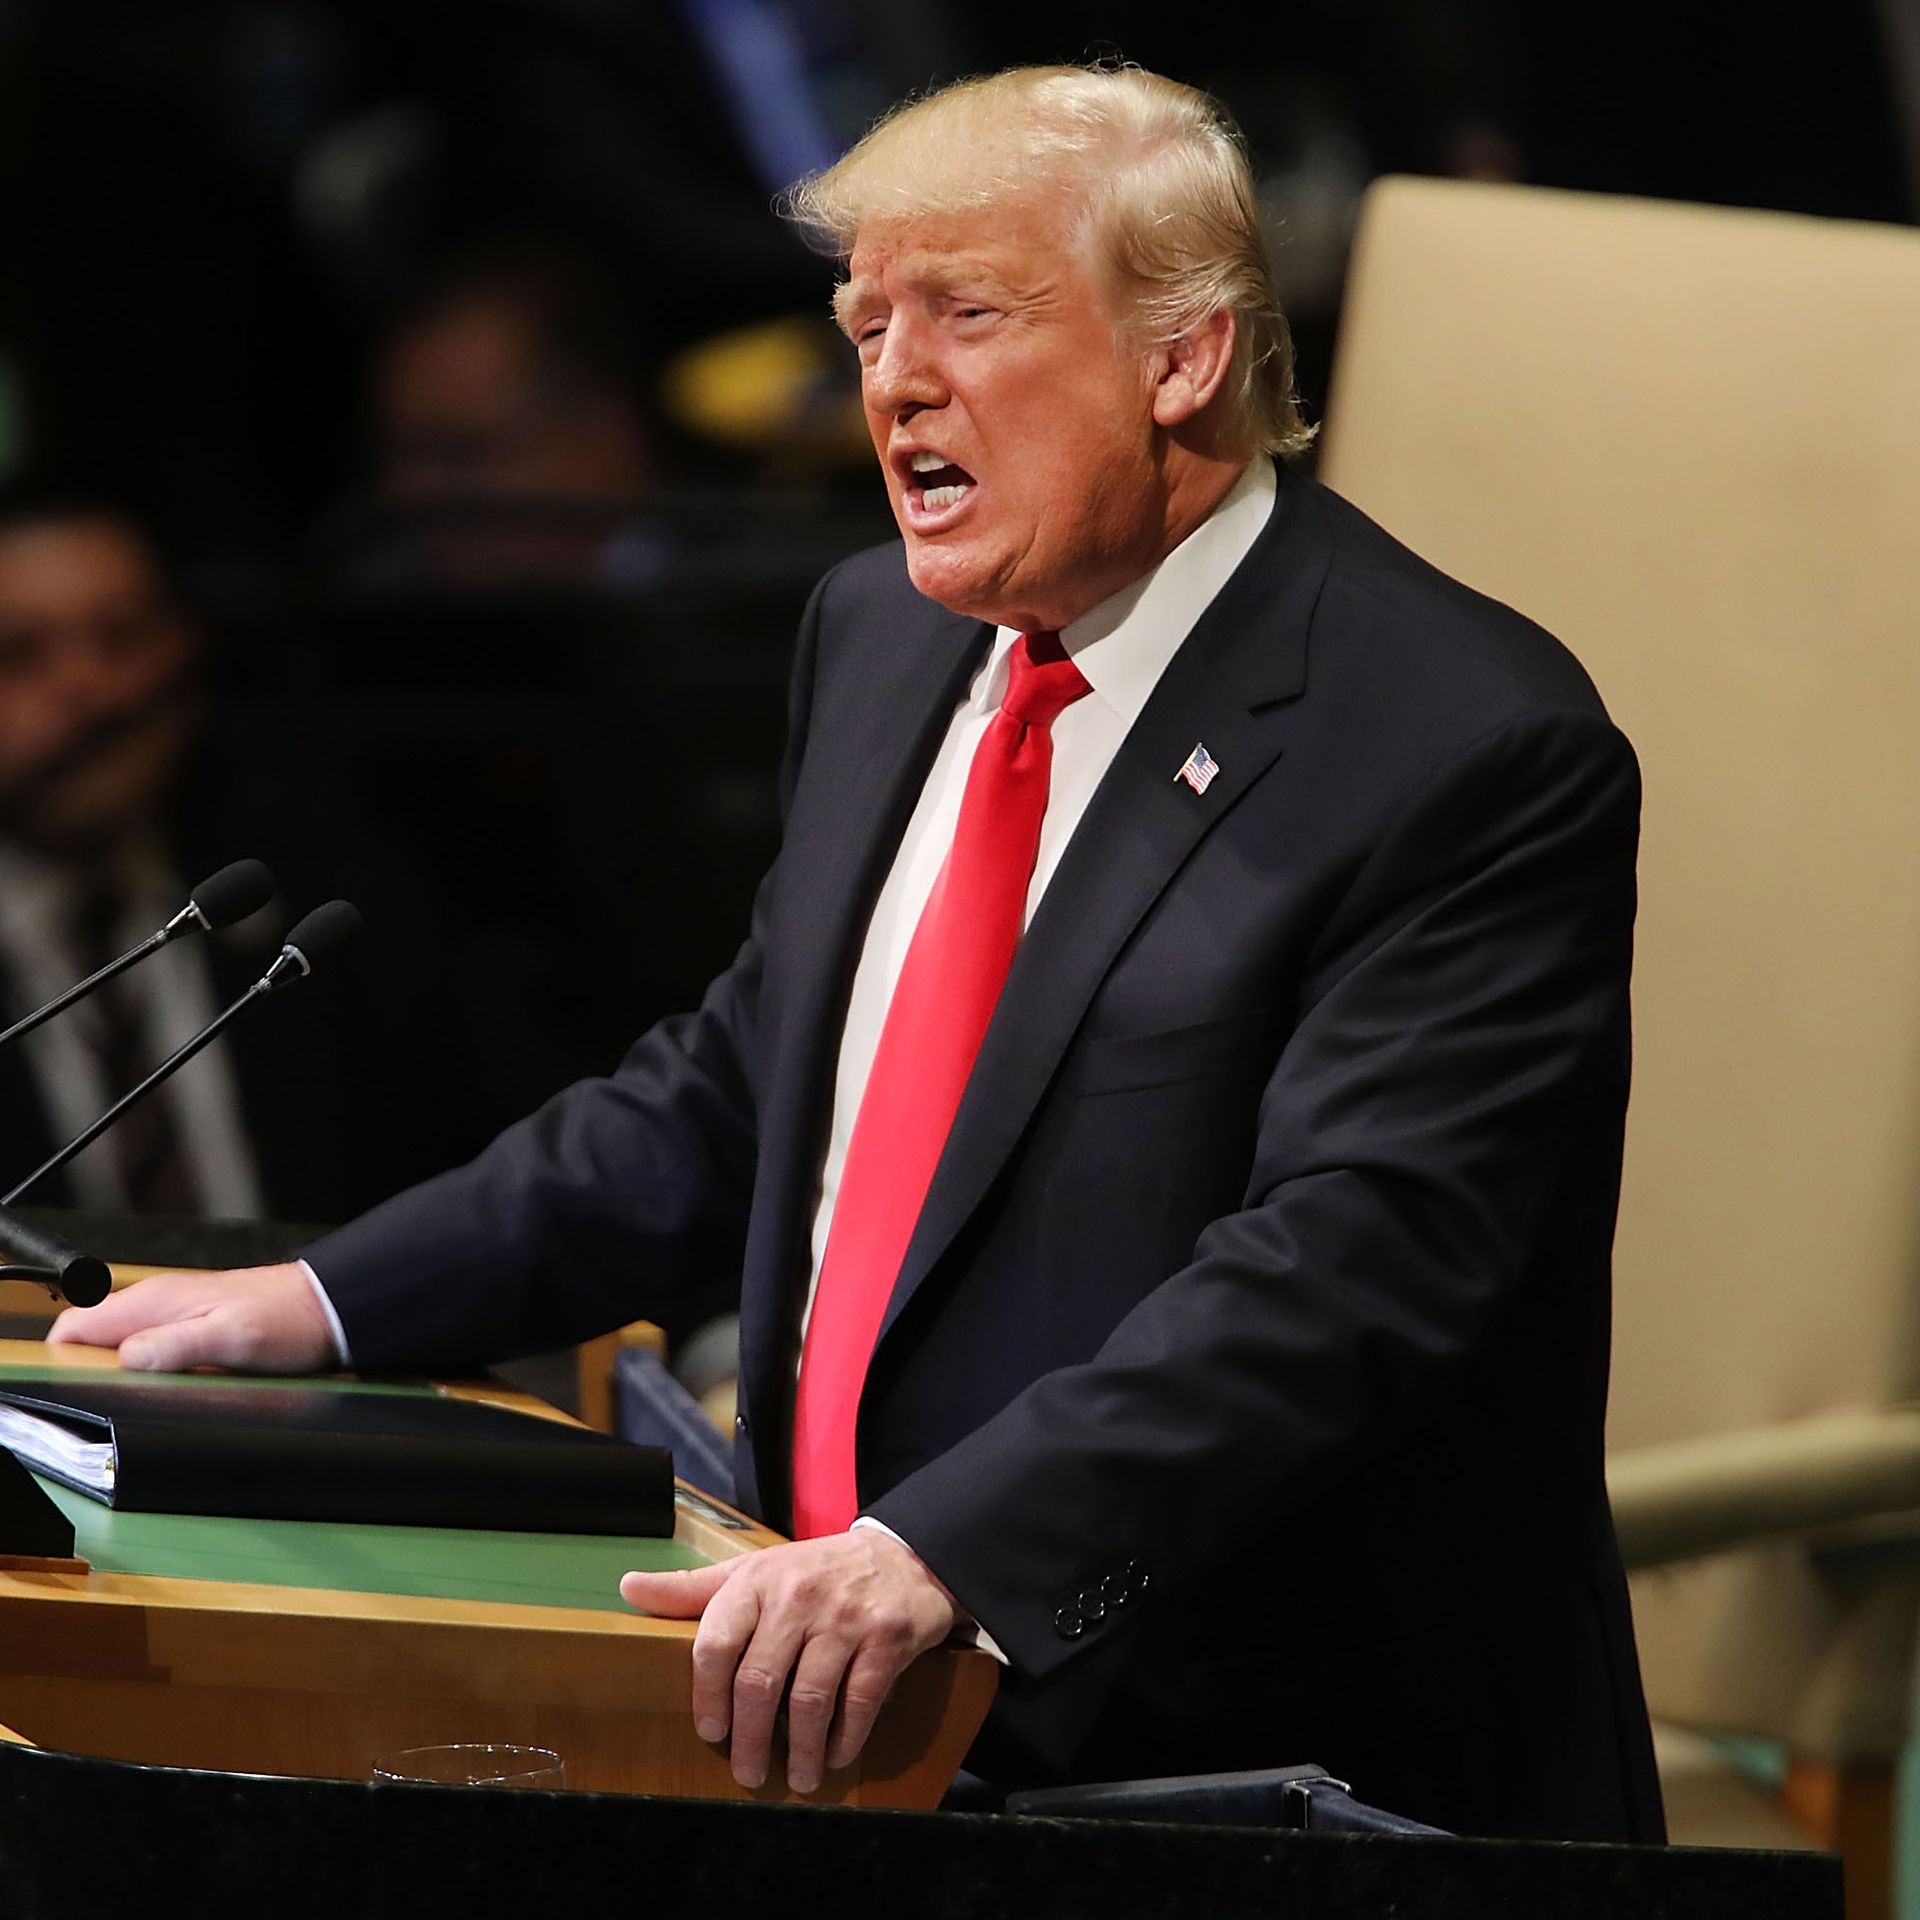 President Donald Trump addresses the 73rd United Nations (U.N.) General Assembly on September 25, 2018 in New York City.